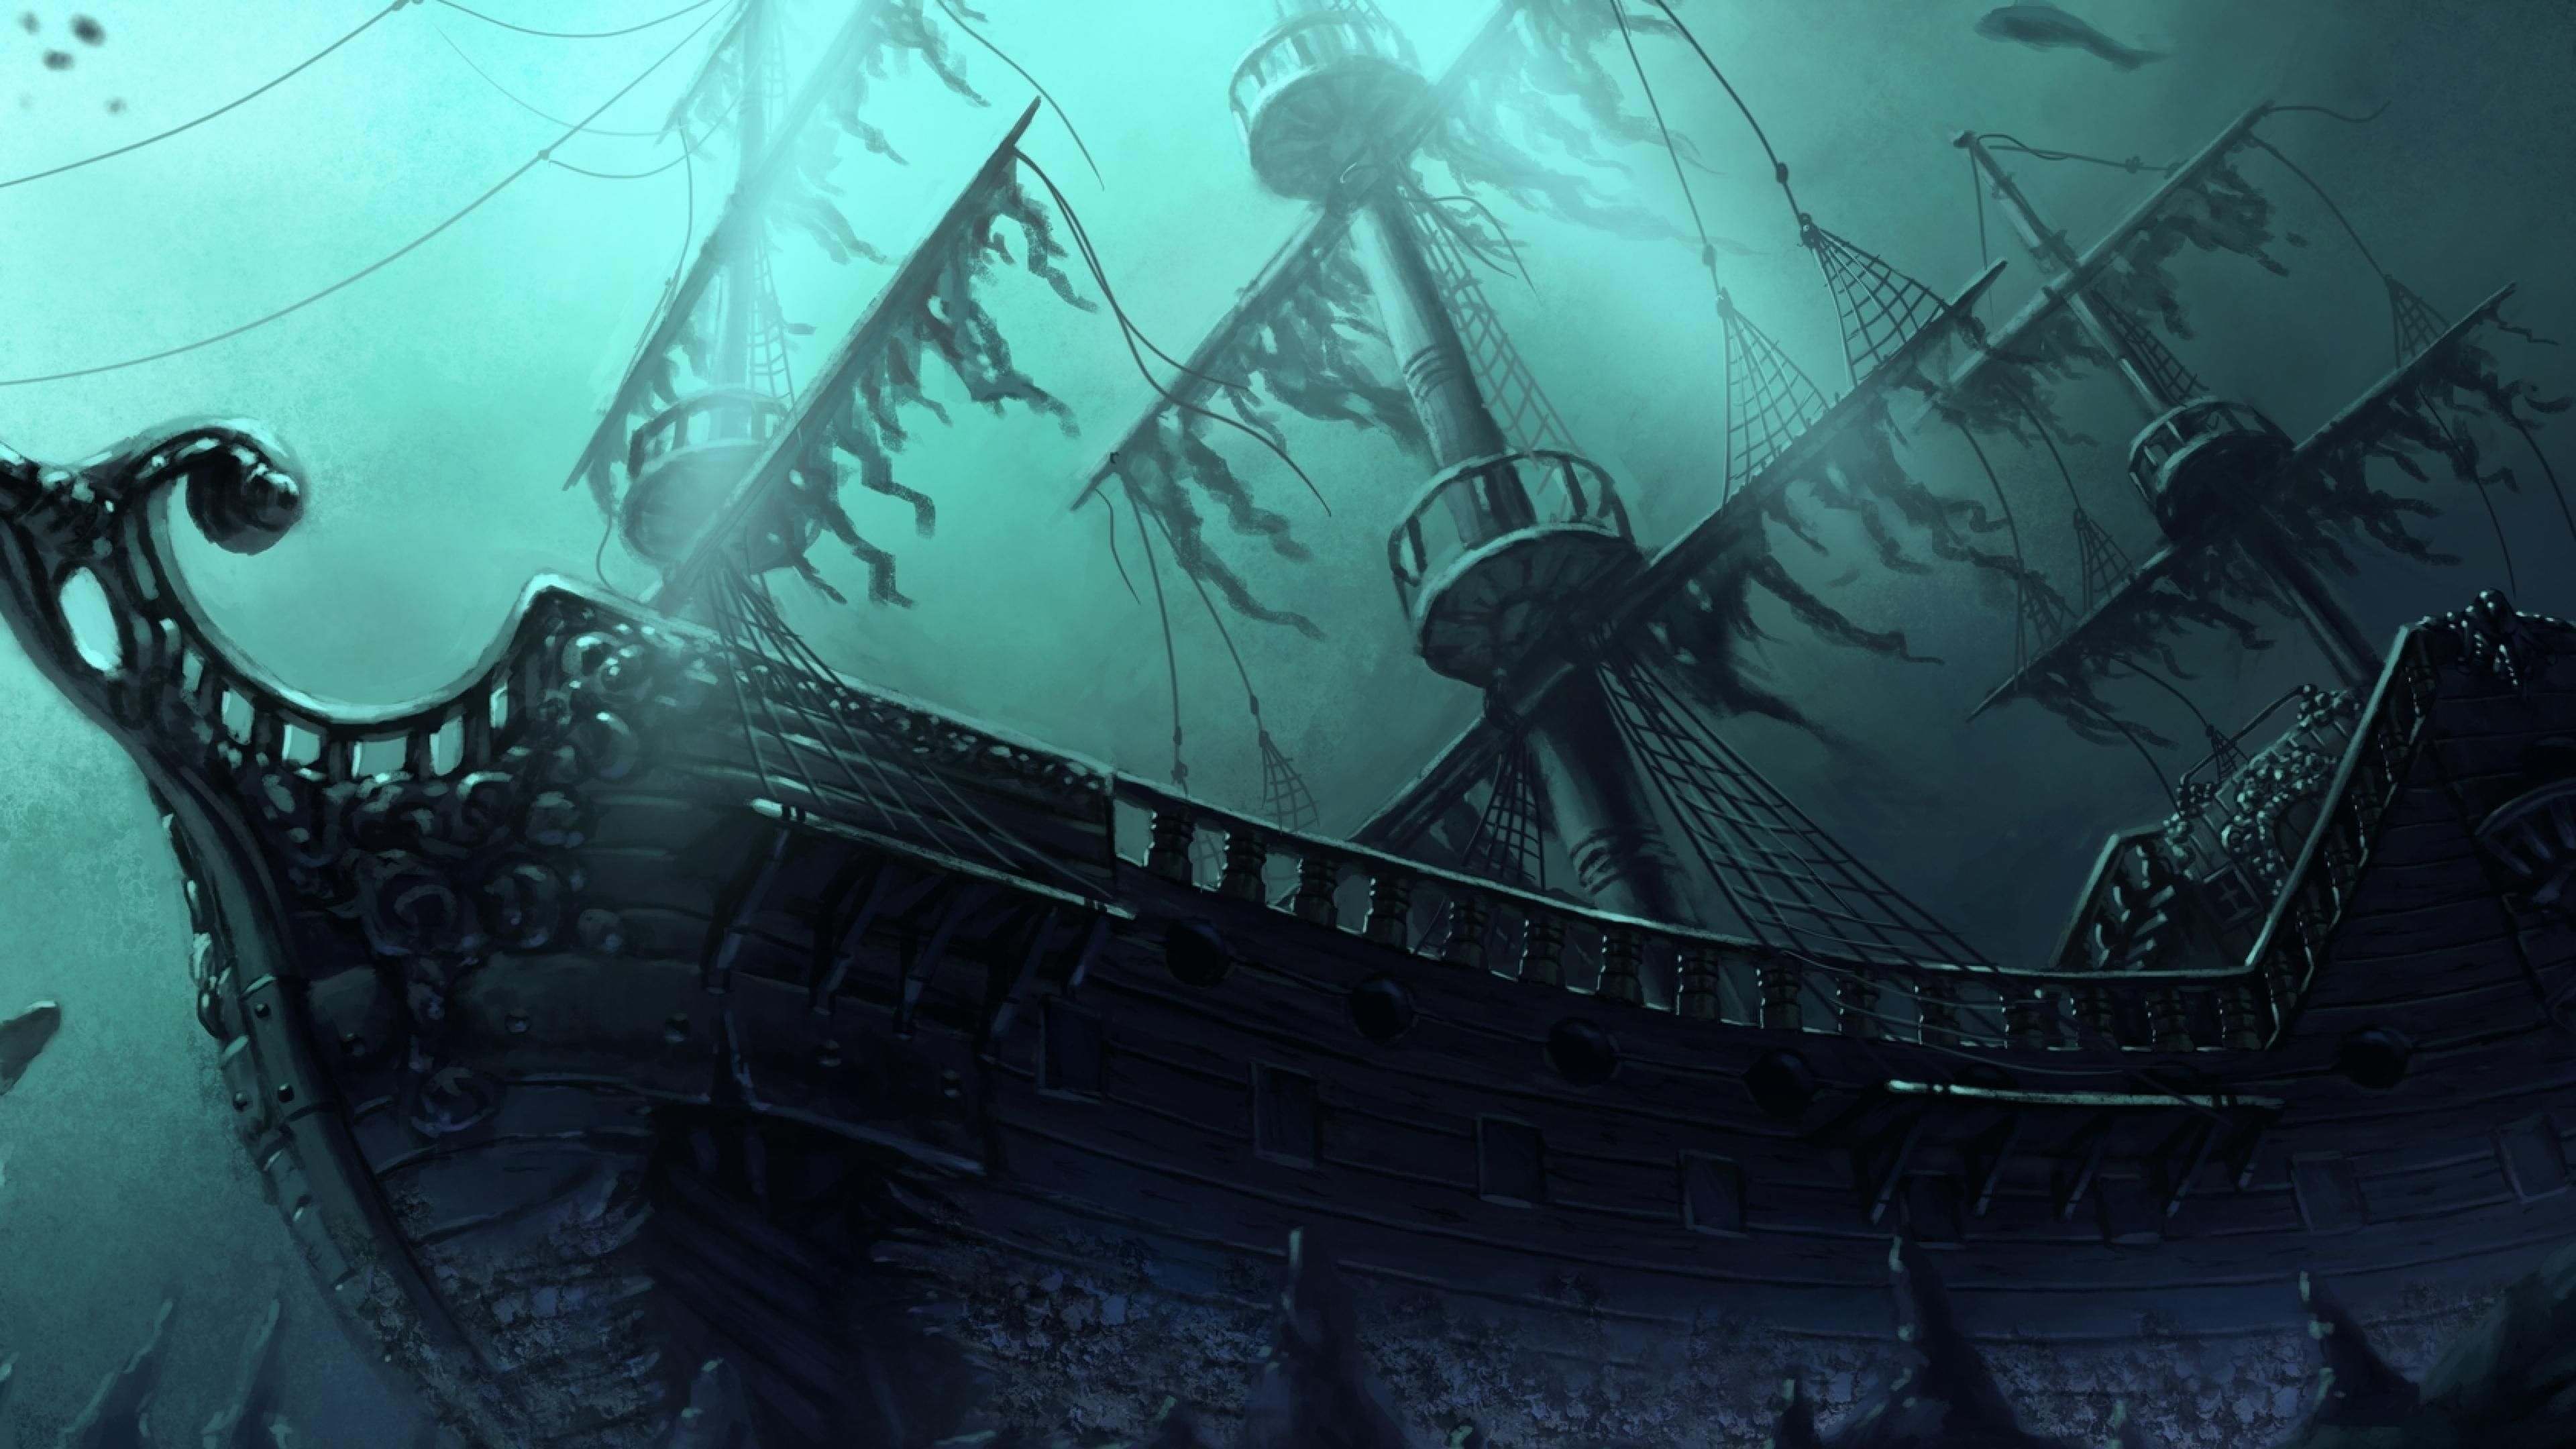 Free download Ghost Pirate Ship Wallpaper High Quality Resolution